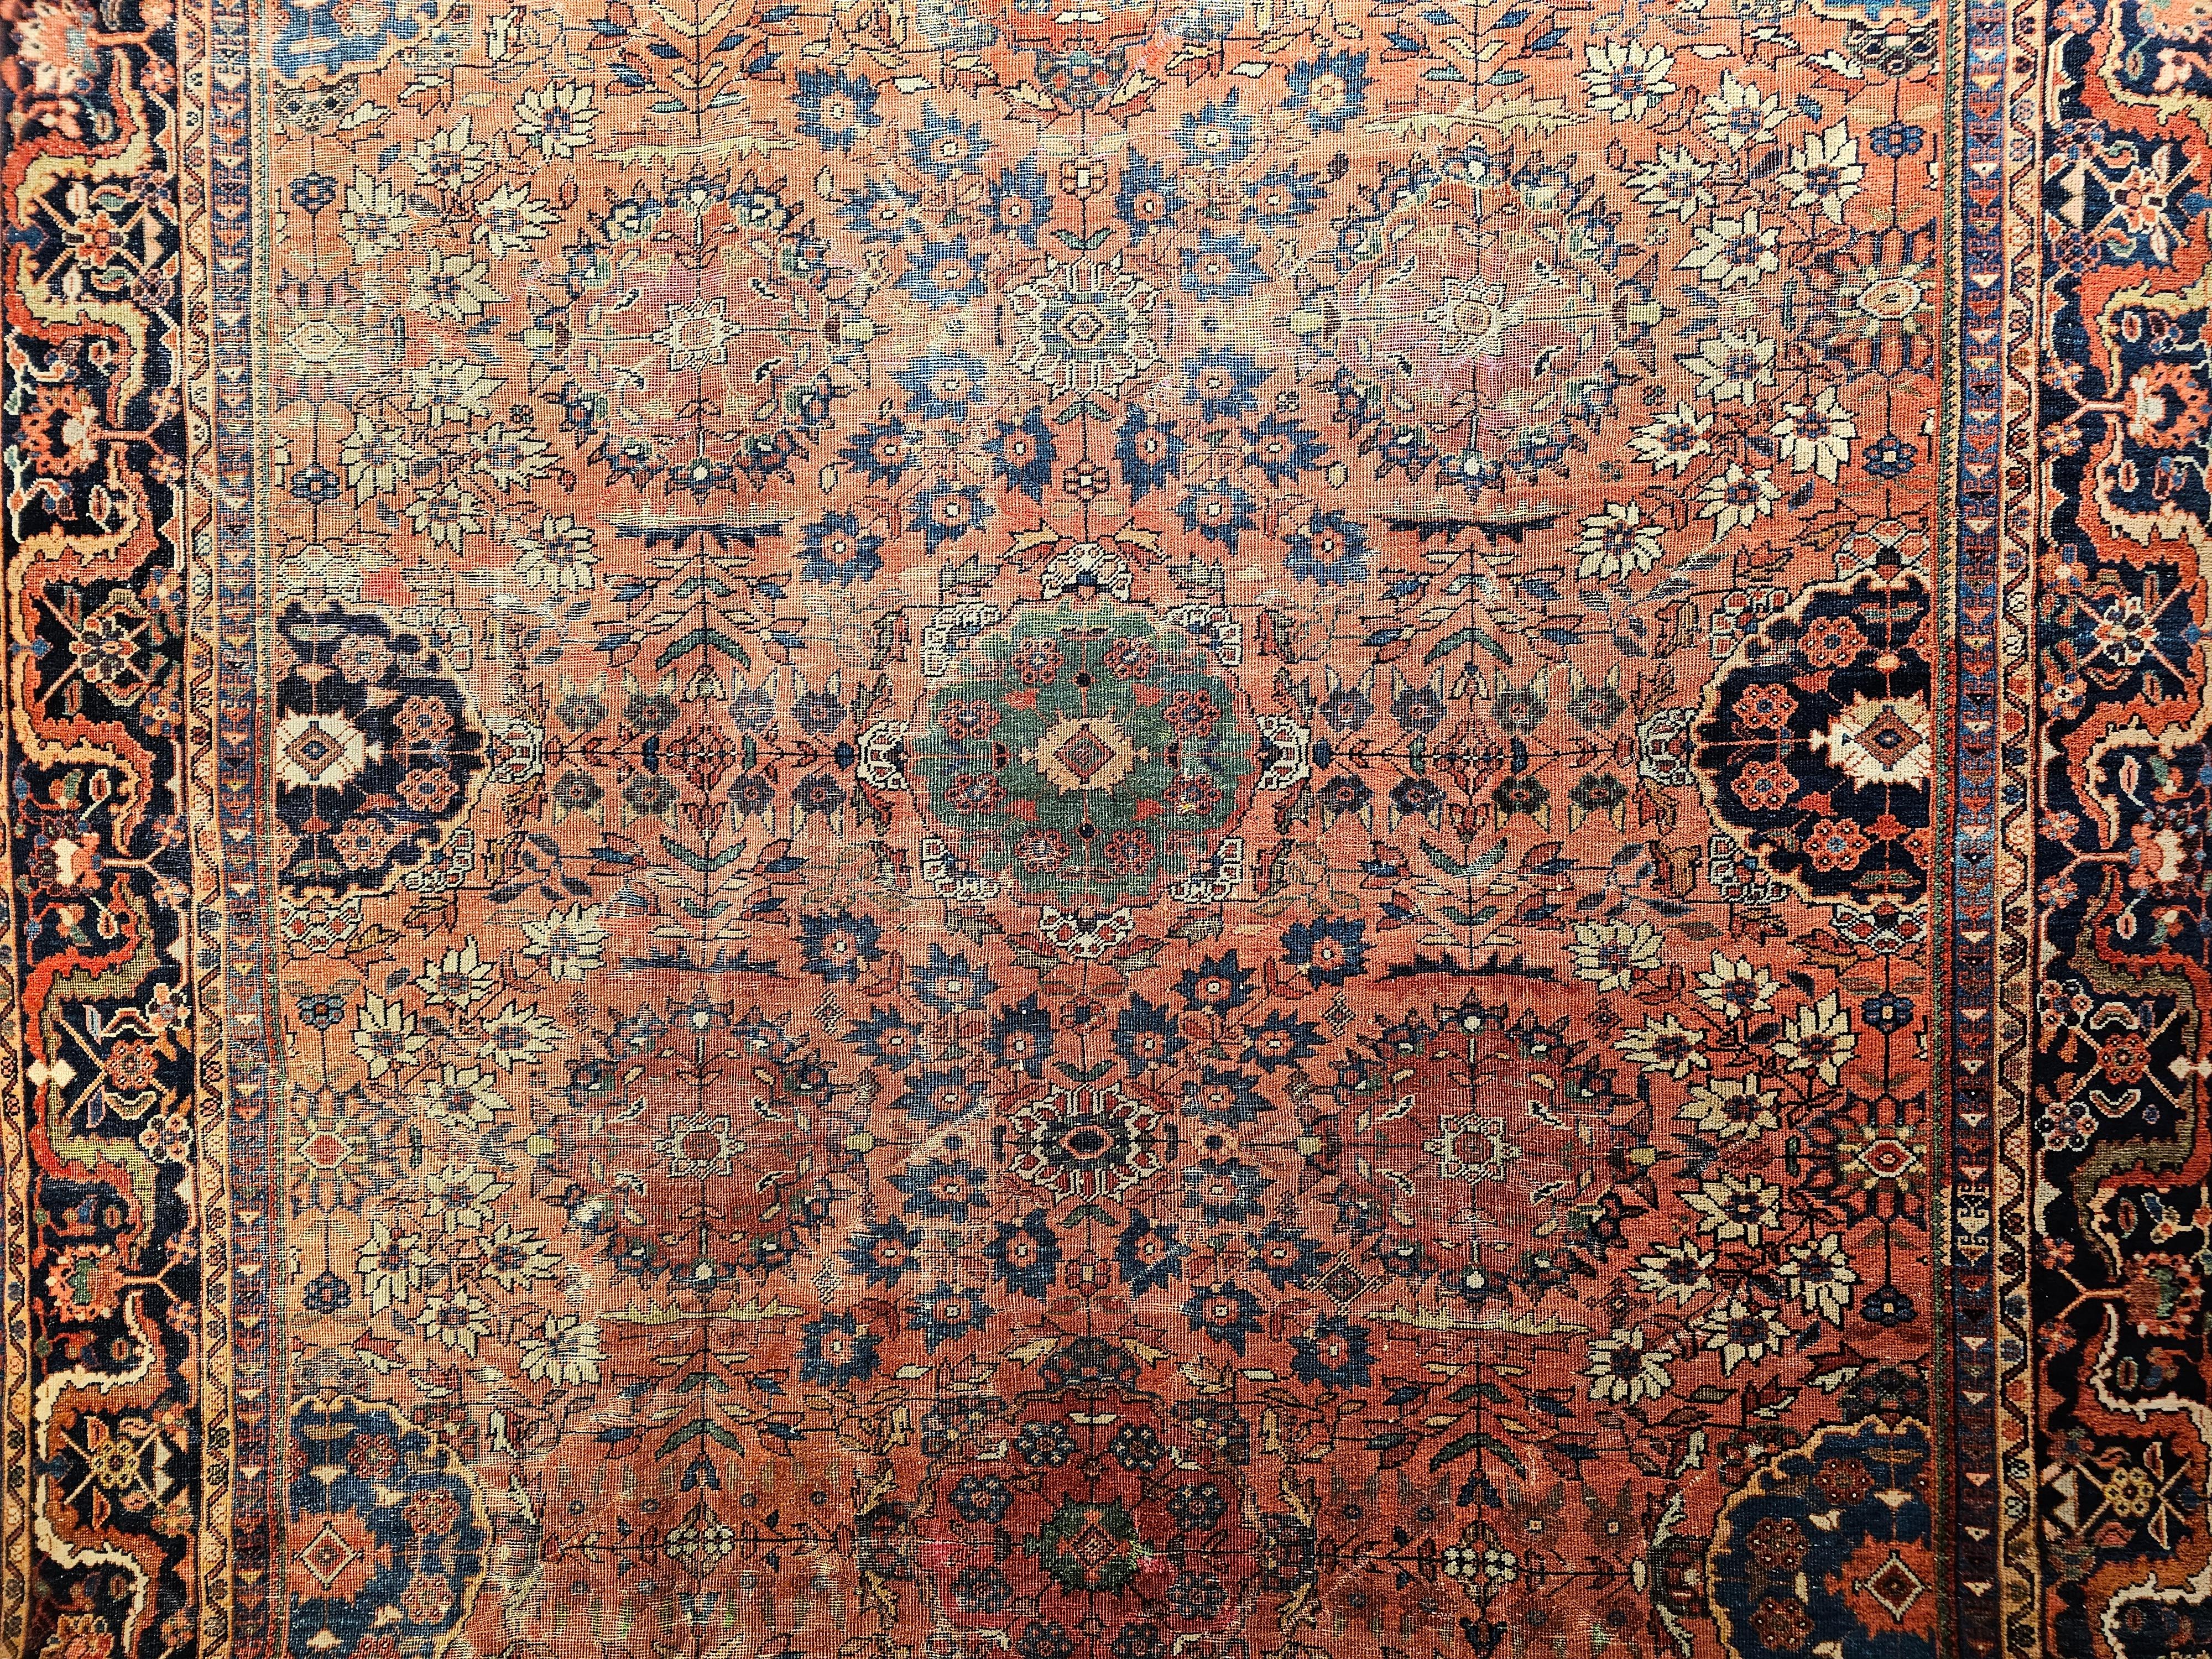 Hand-Woven Vintage Persian Mahal Sultanabad Room Size Rug in Brick Red, Navy Blue